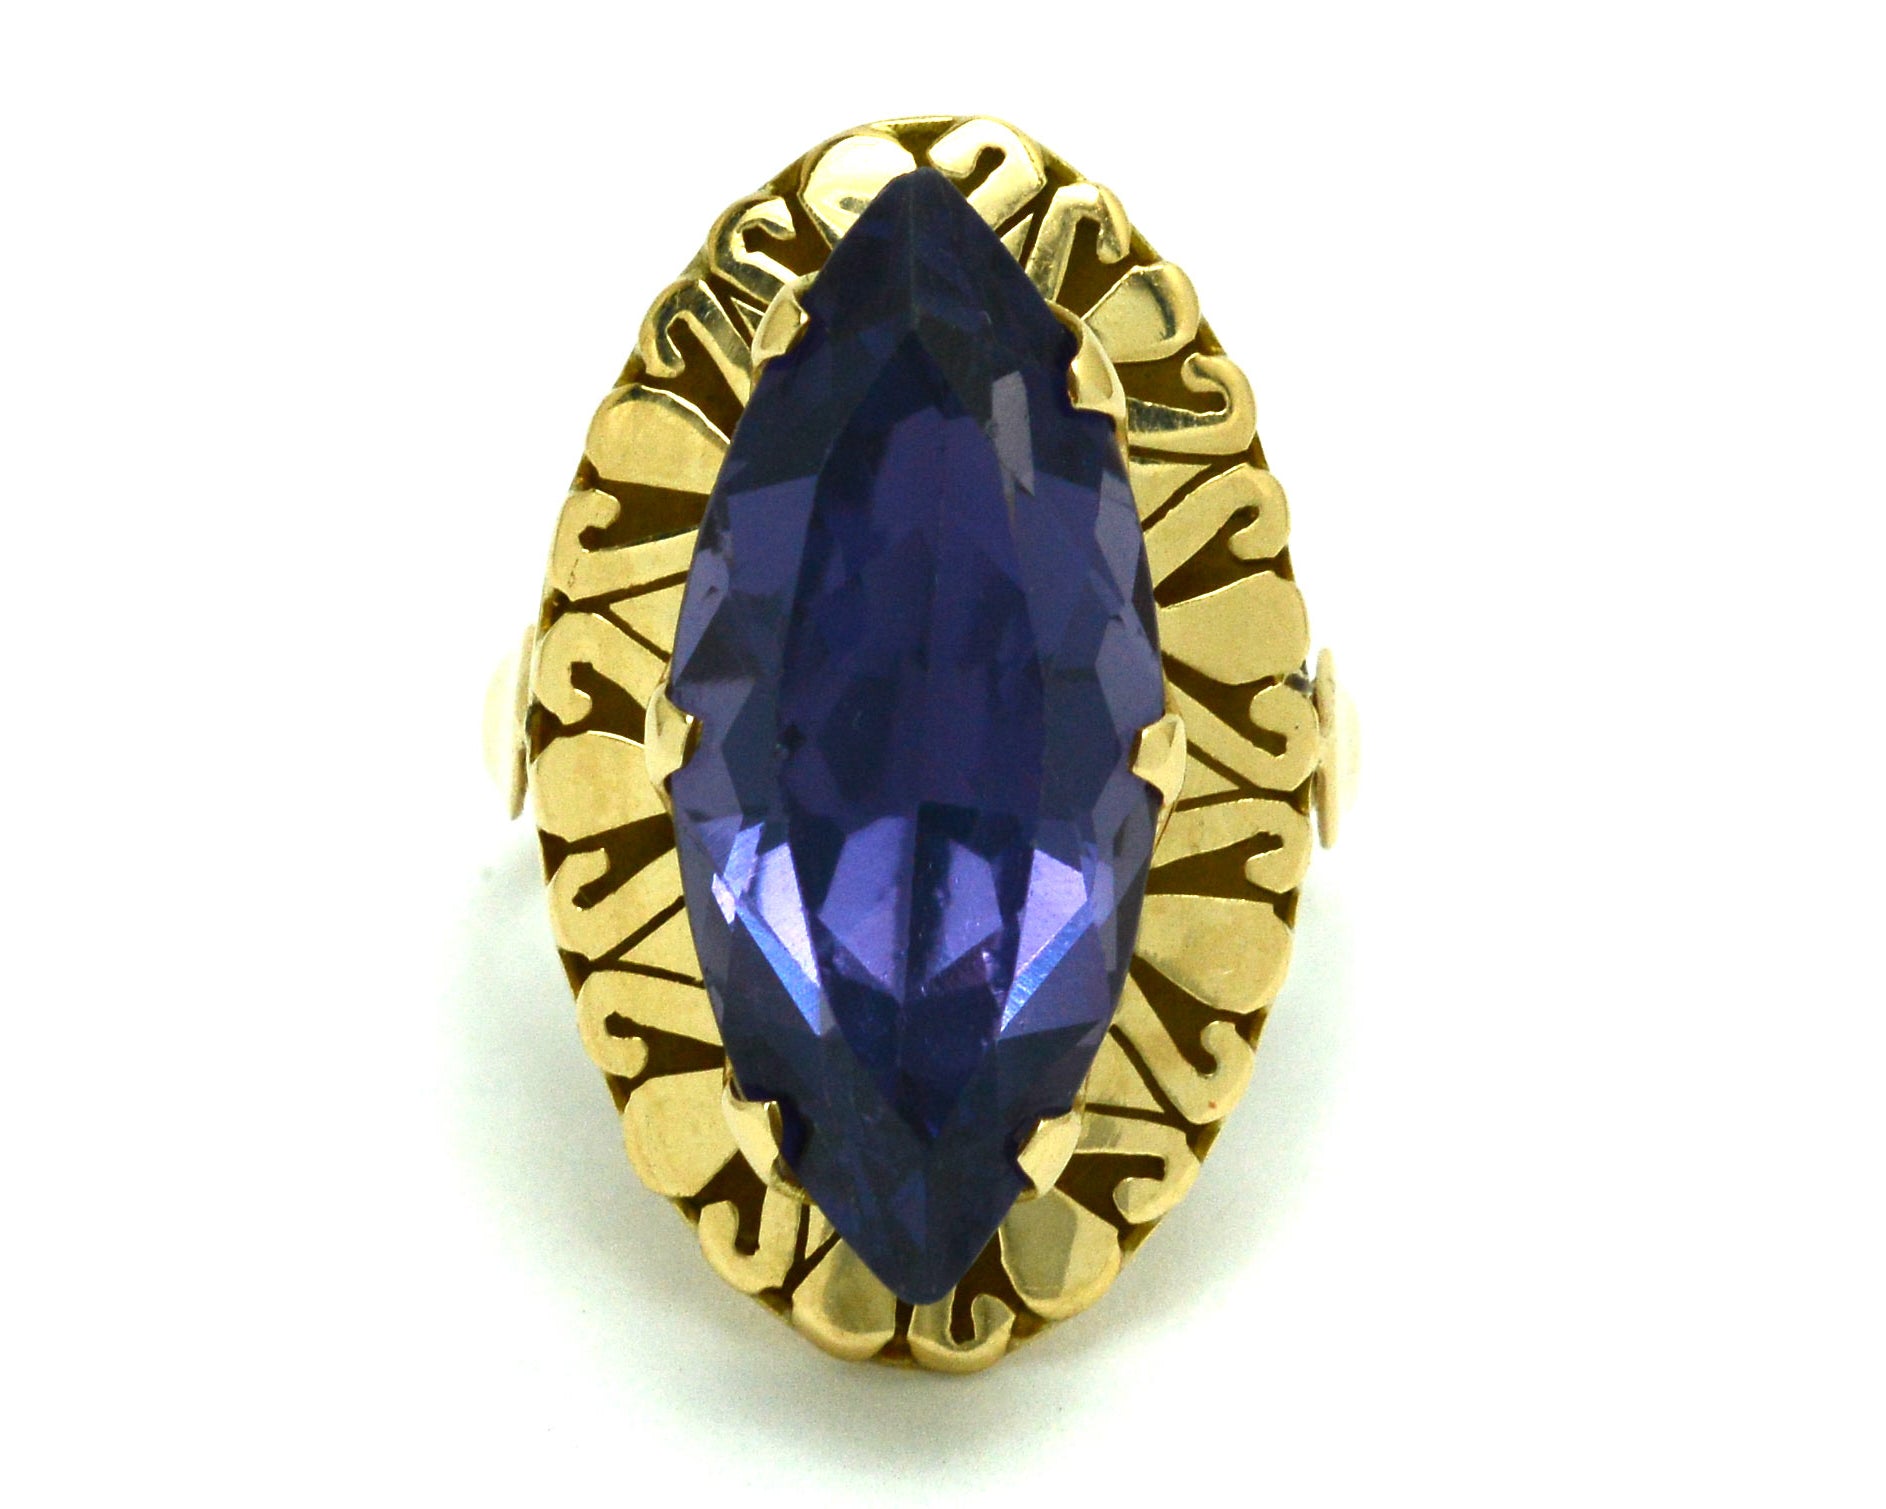 A marquise cut amethyst in a retro 14k gold ring setting.